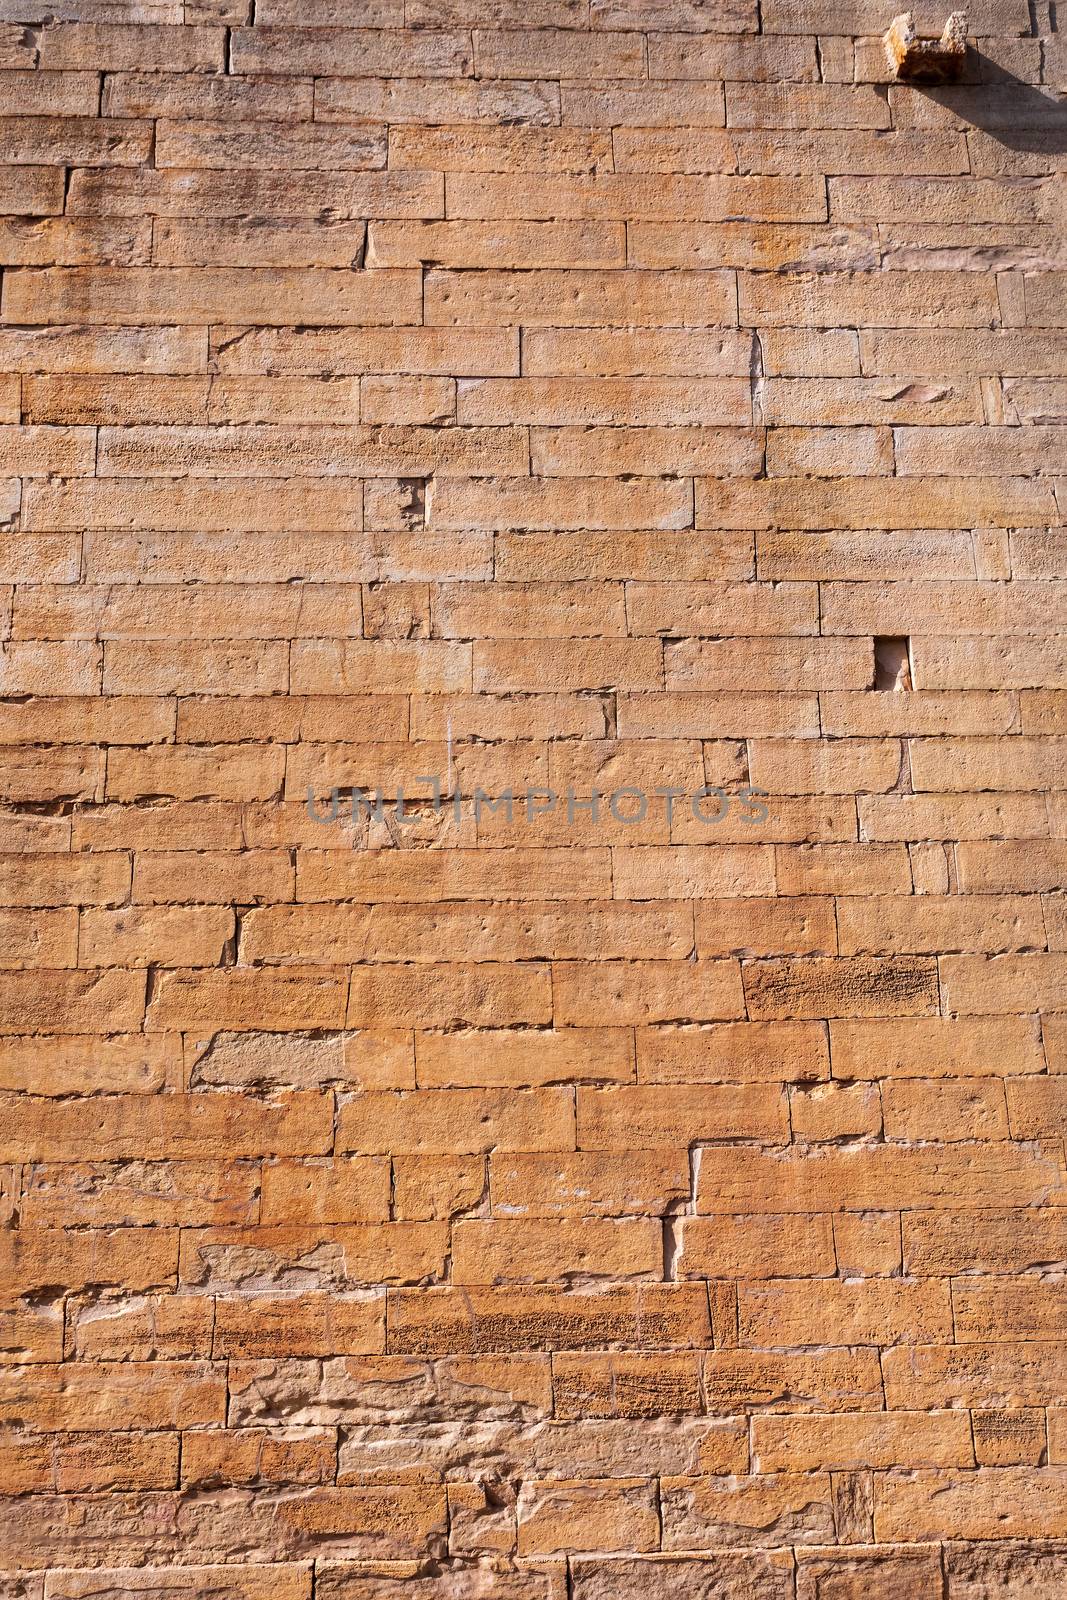 stone block texture in Yeha temple, Ethiopia, Africa by artush